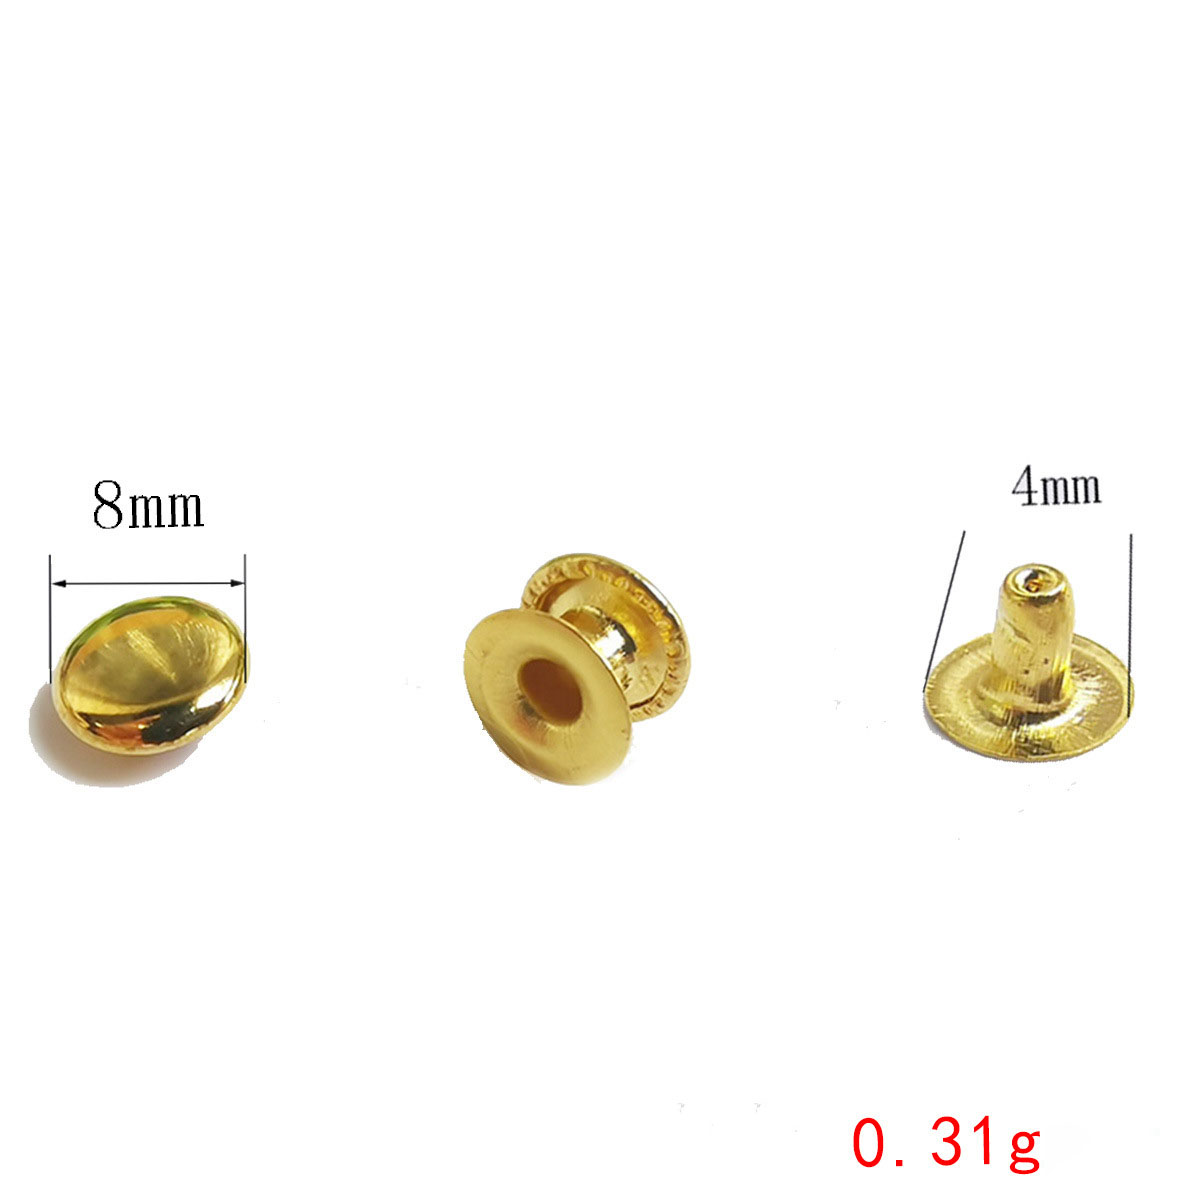 8mm gold